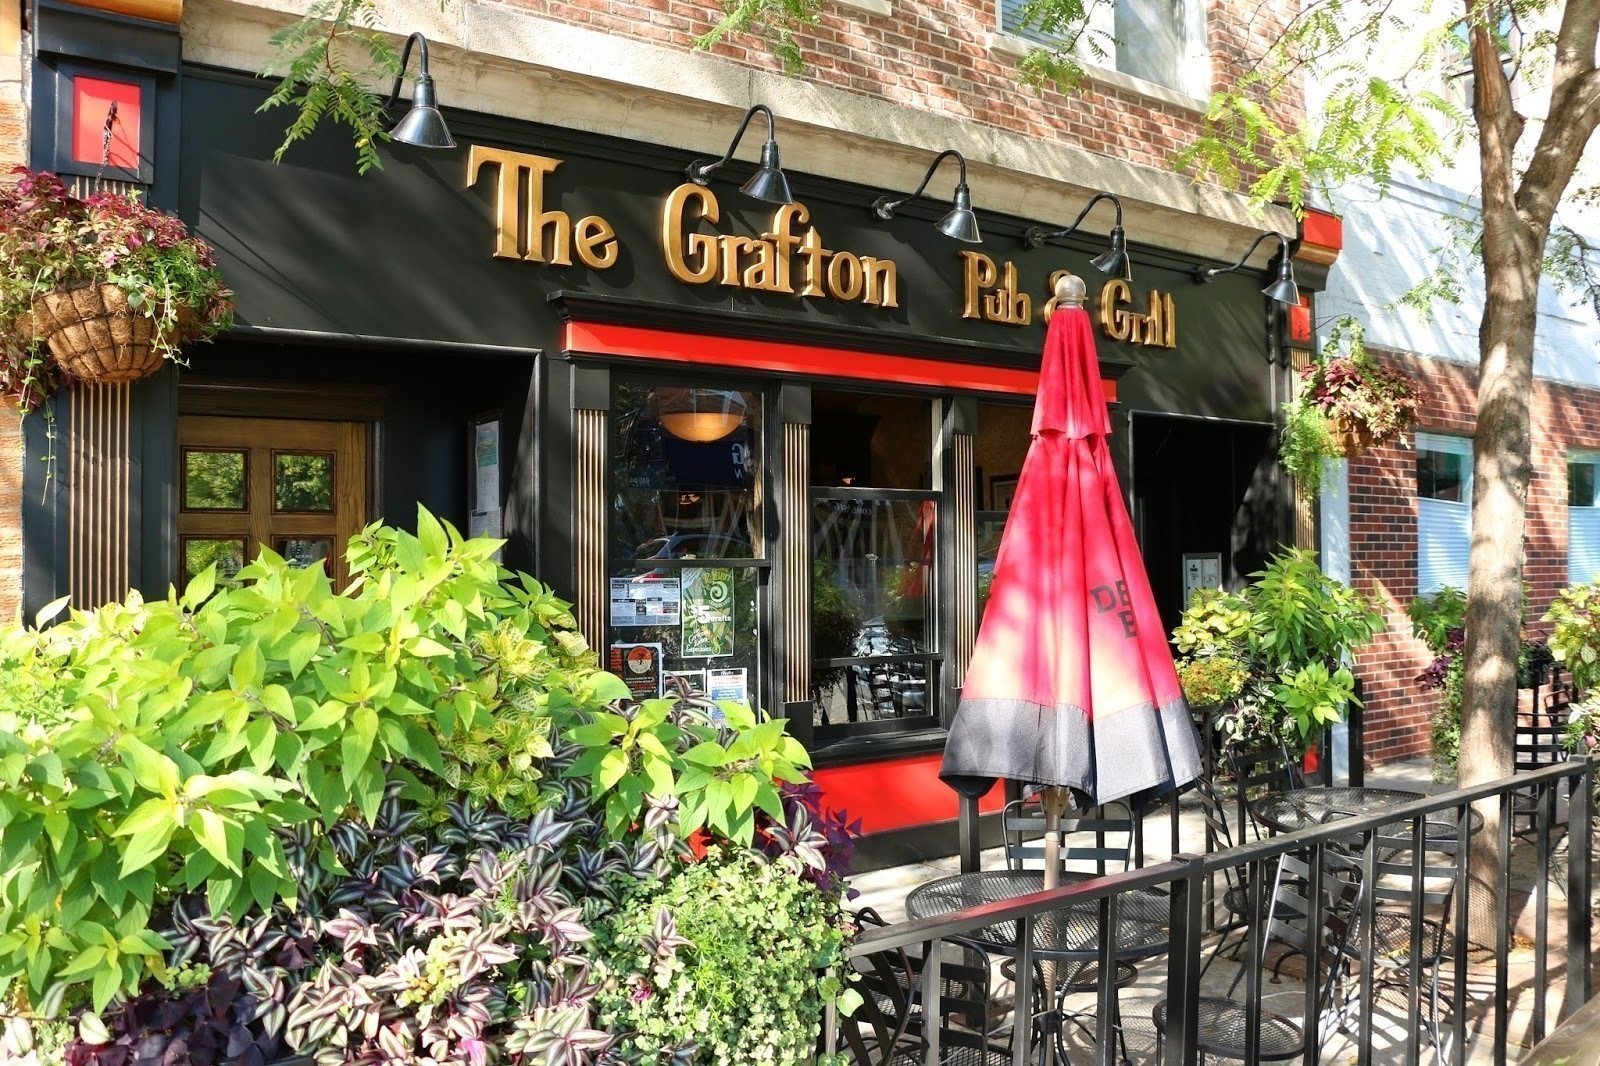 The Grafton Pub & Grill: A Work-Friendly Place in Chicago